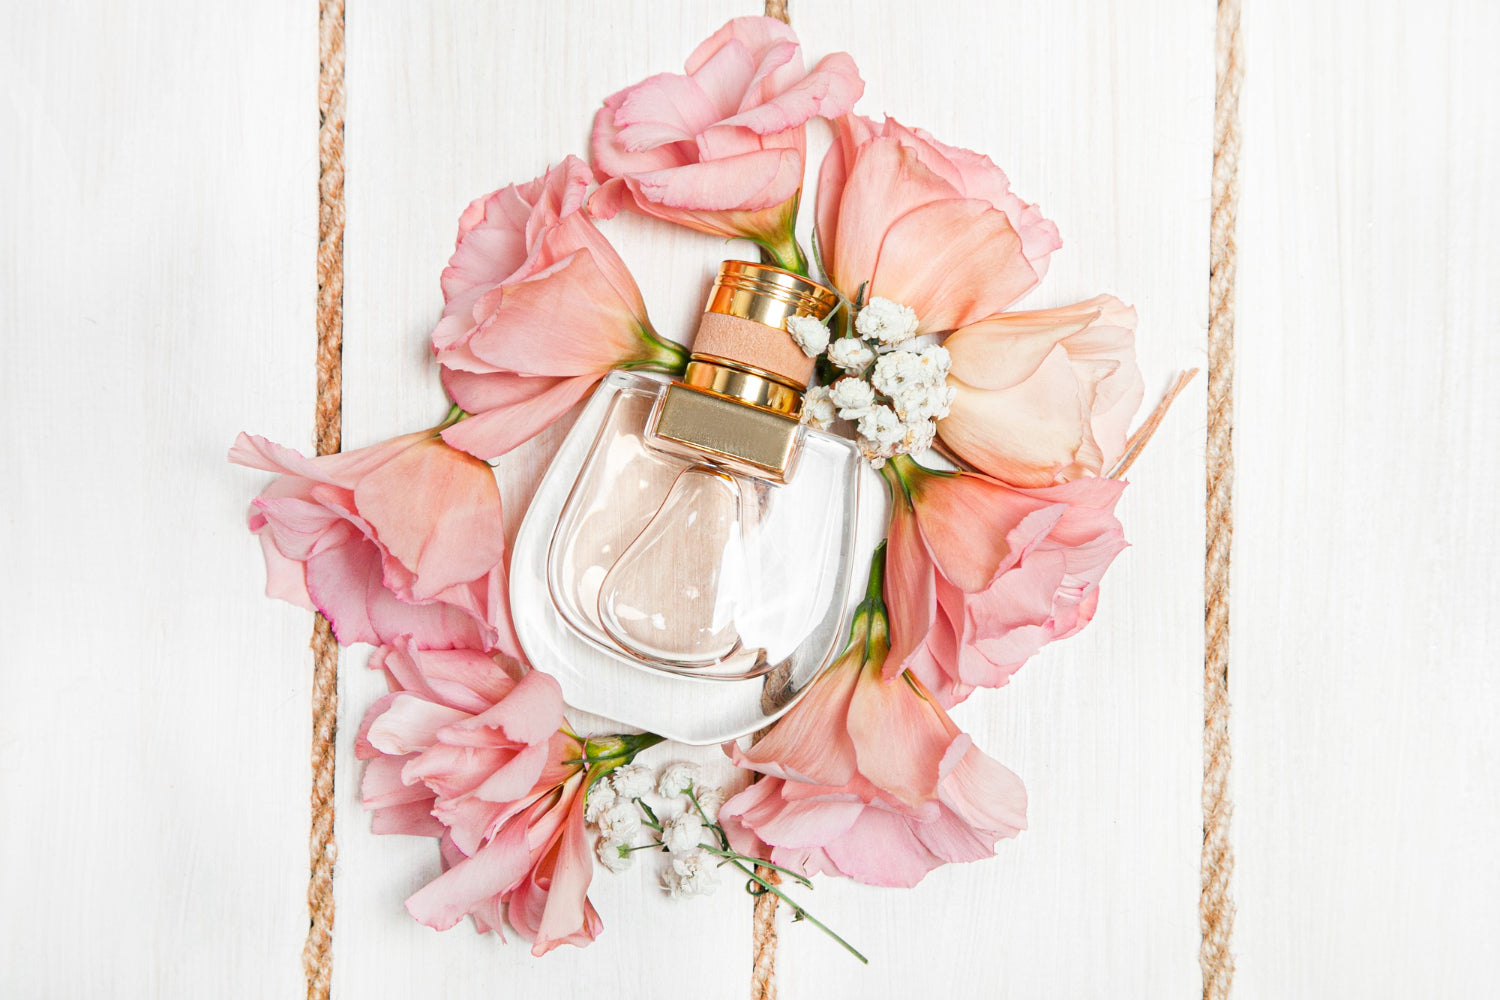 Does Your Perfume Smell as Good as It Should?